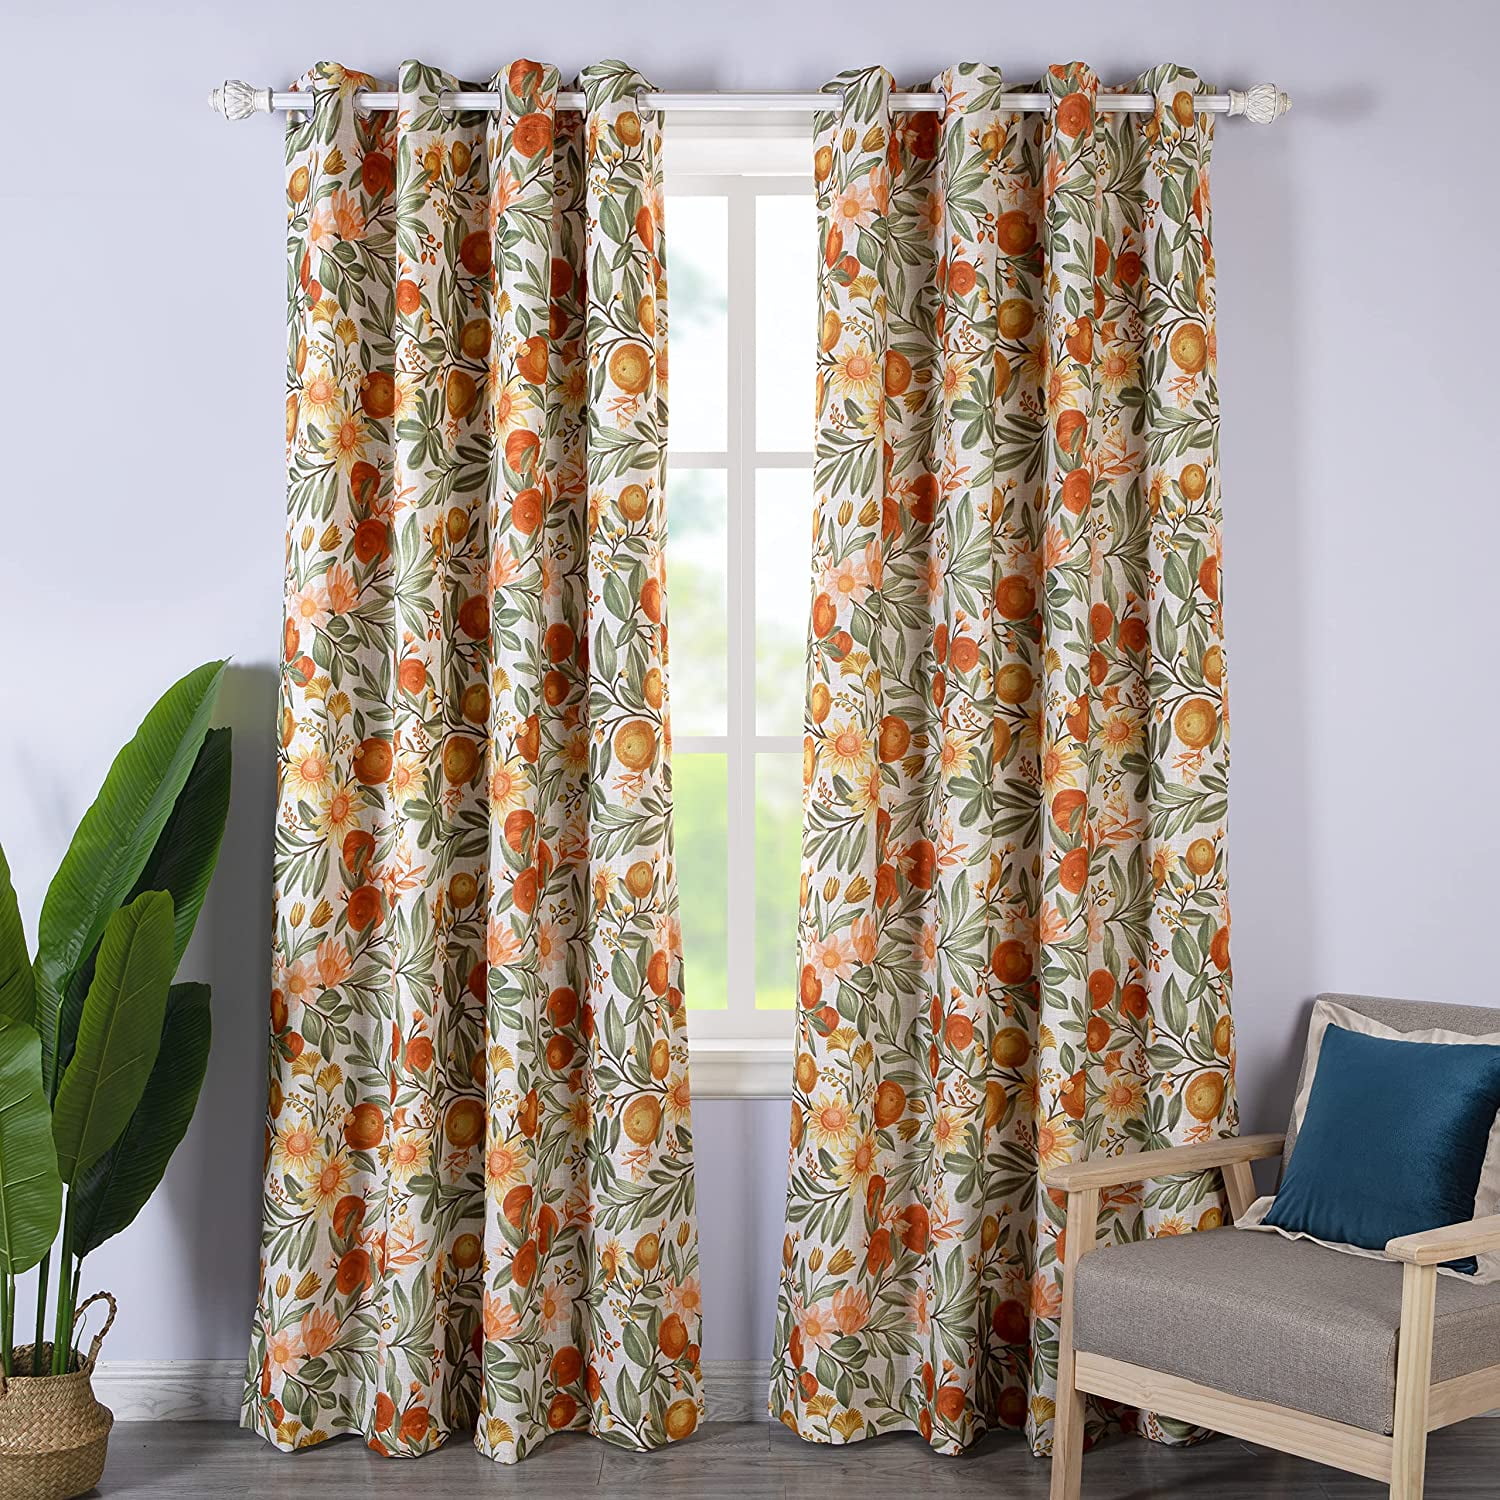 1PC PANEL SOPHISTICATED FLORAL PRINTED WINDOW CUTAIN INSULATED LINED BLACKOUT 